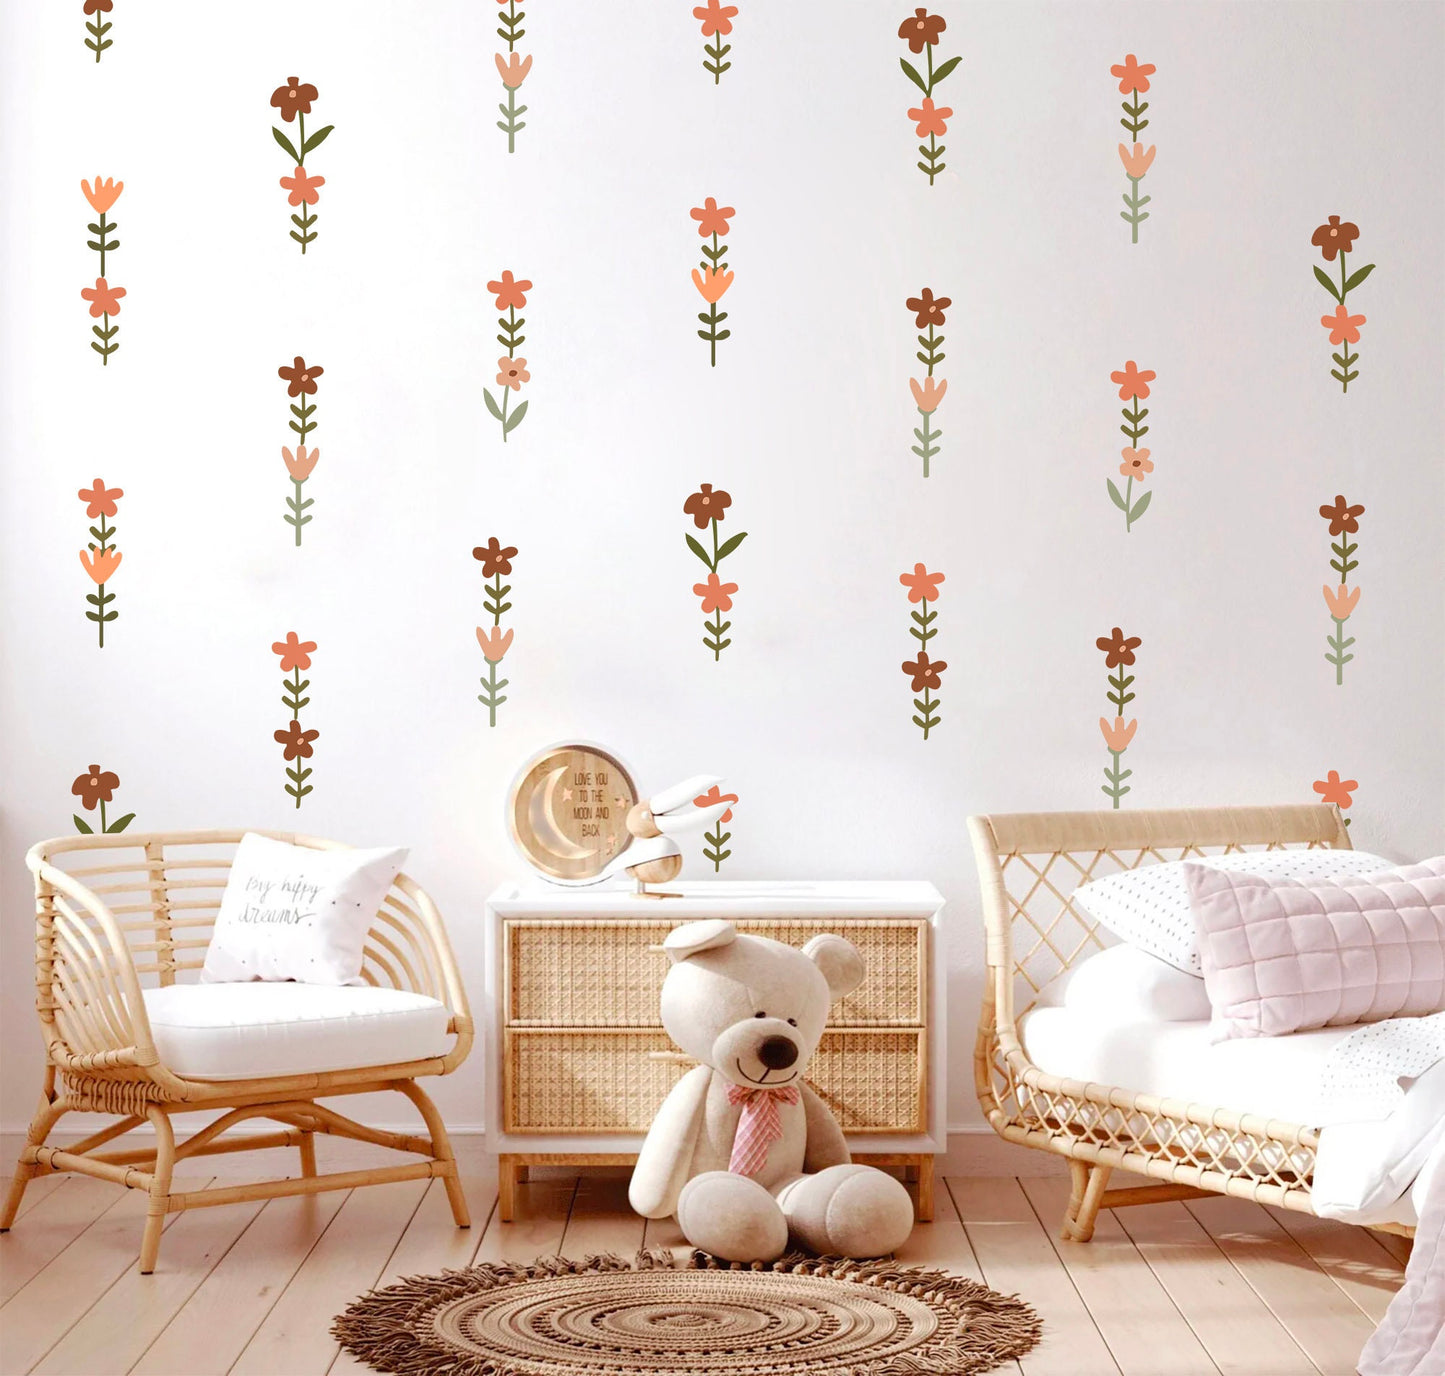 Boho Style Blooming Flowers Wall Decal Removable - BR282